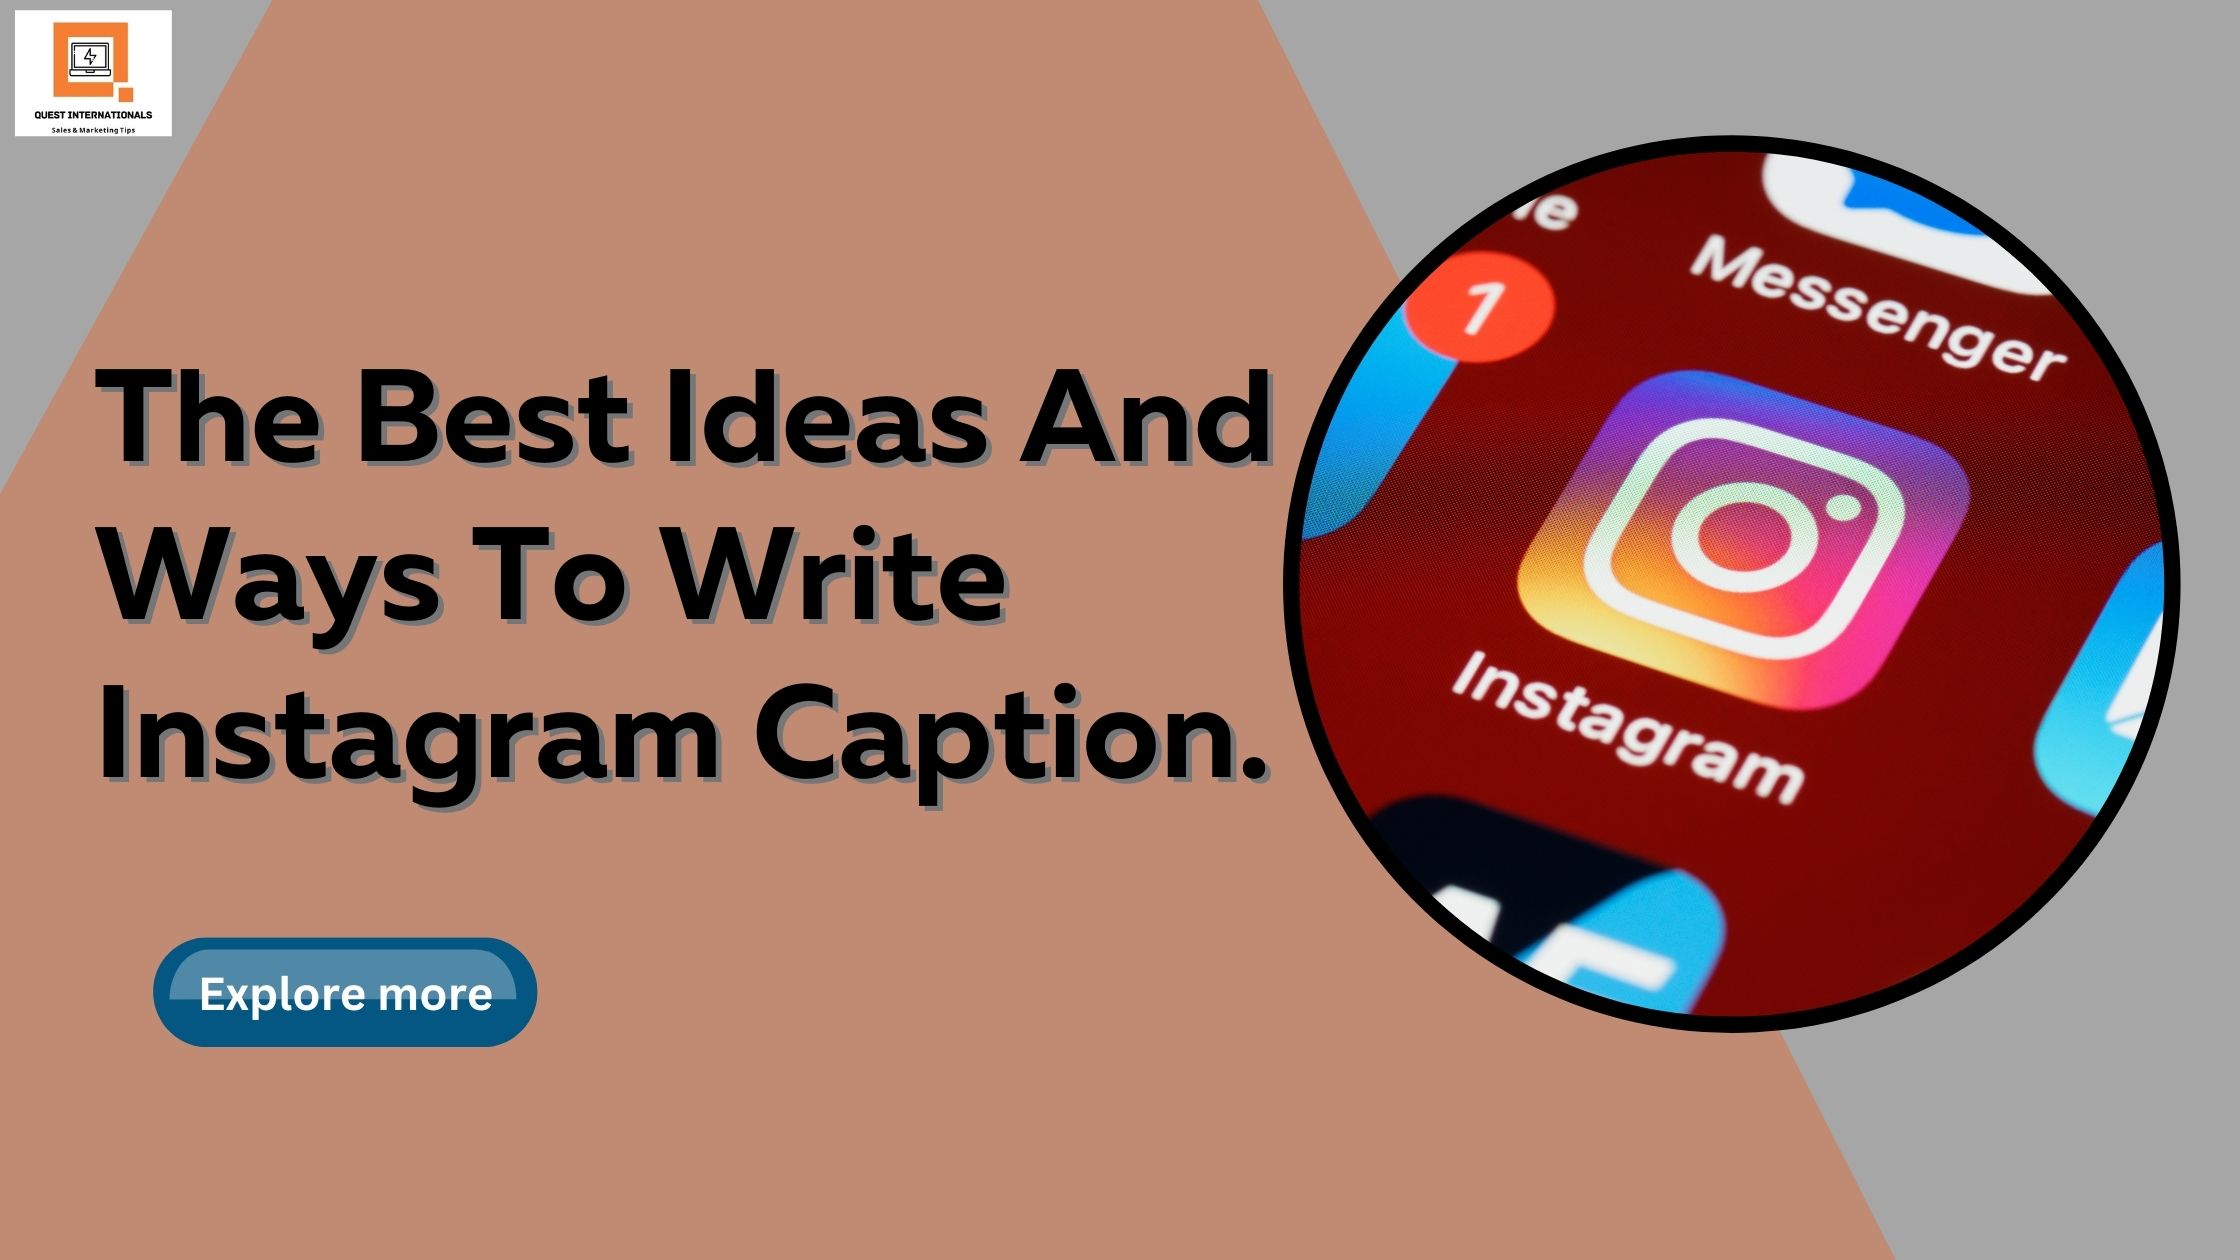 Read more about the article The Best Ideas And Ways To Write Instagram Caption.